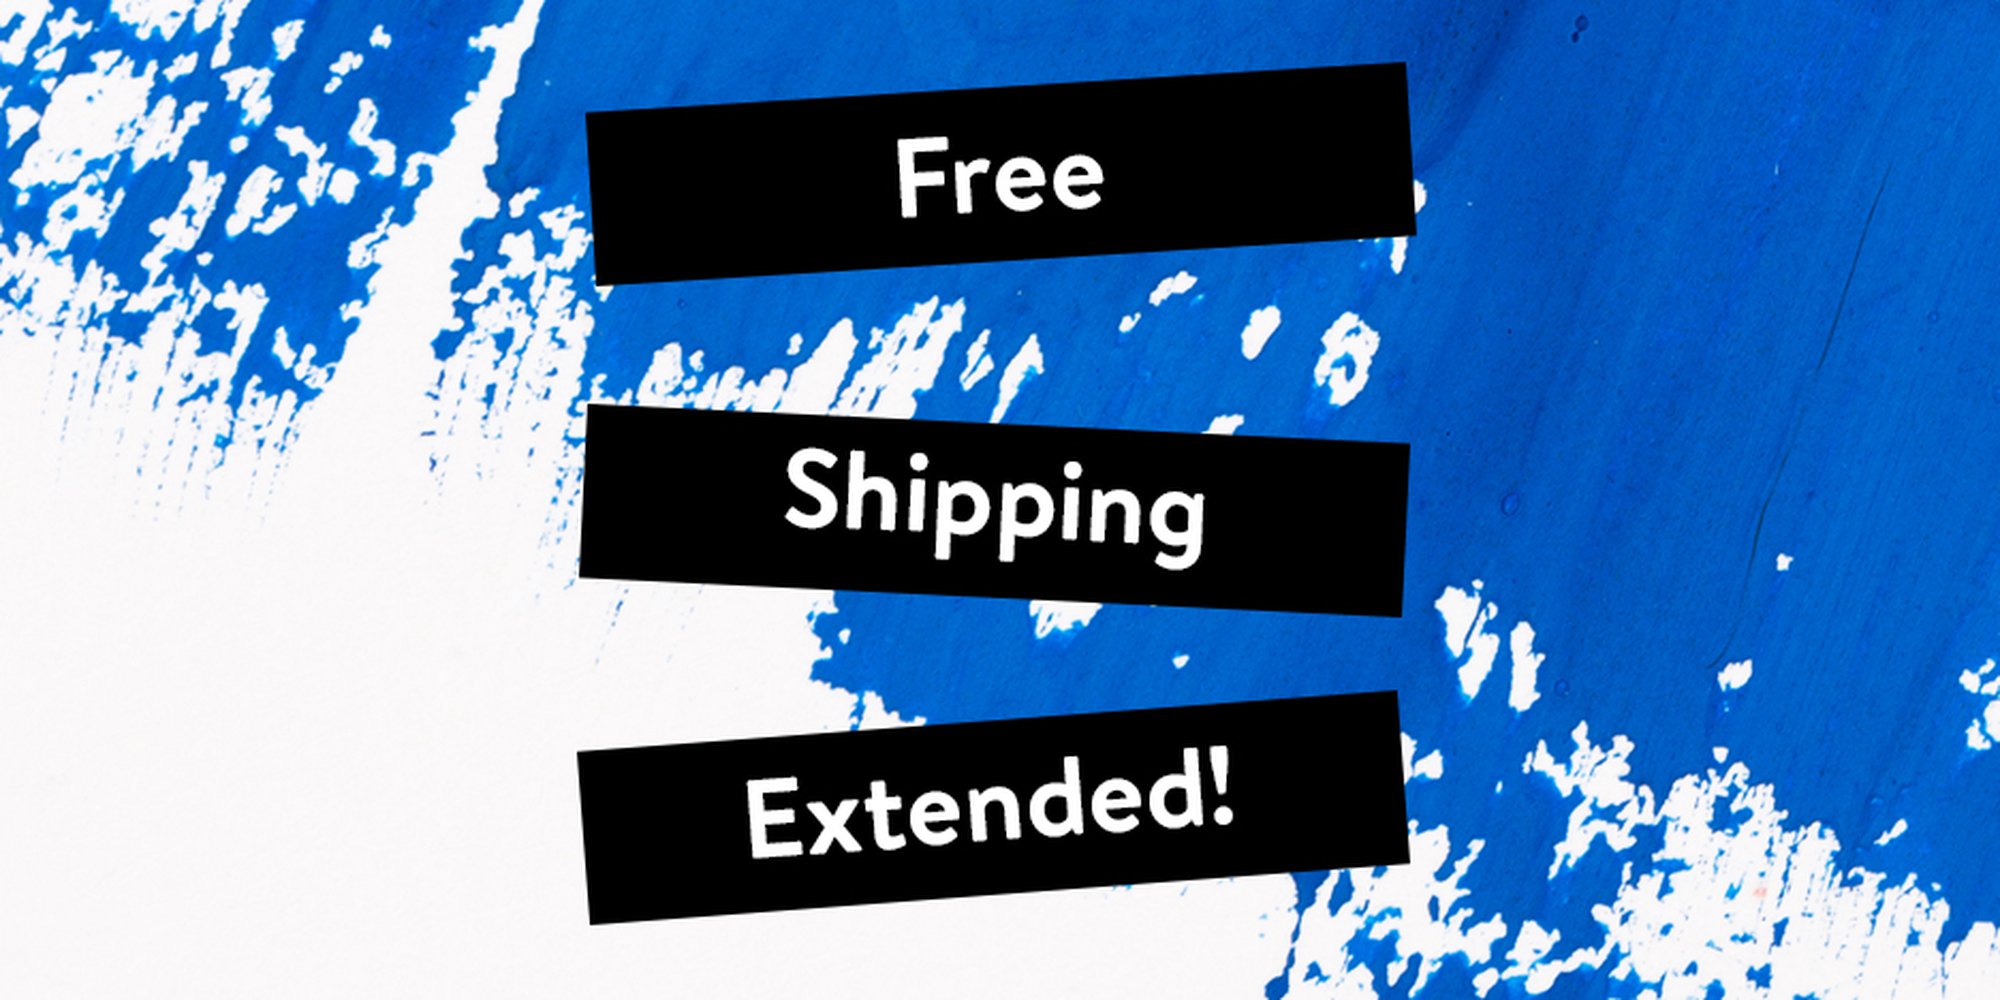 Oops...free shipping promotion extended until the end of March!